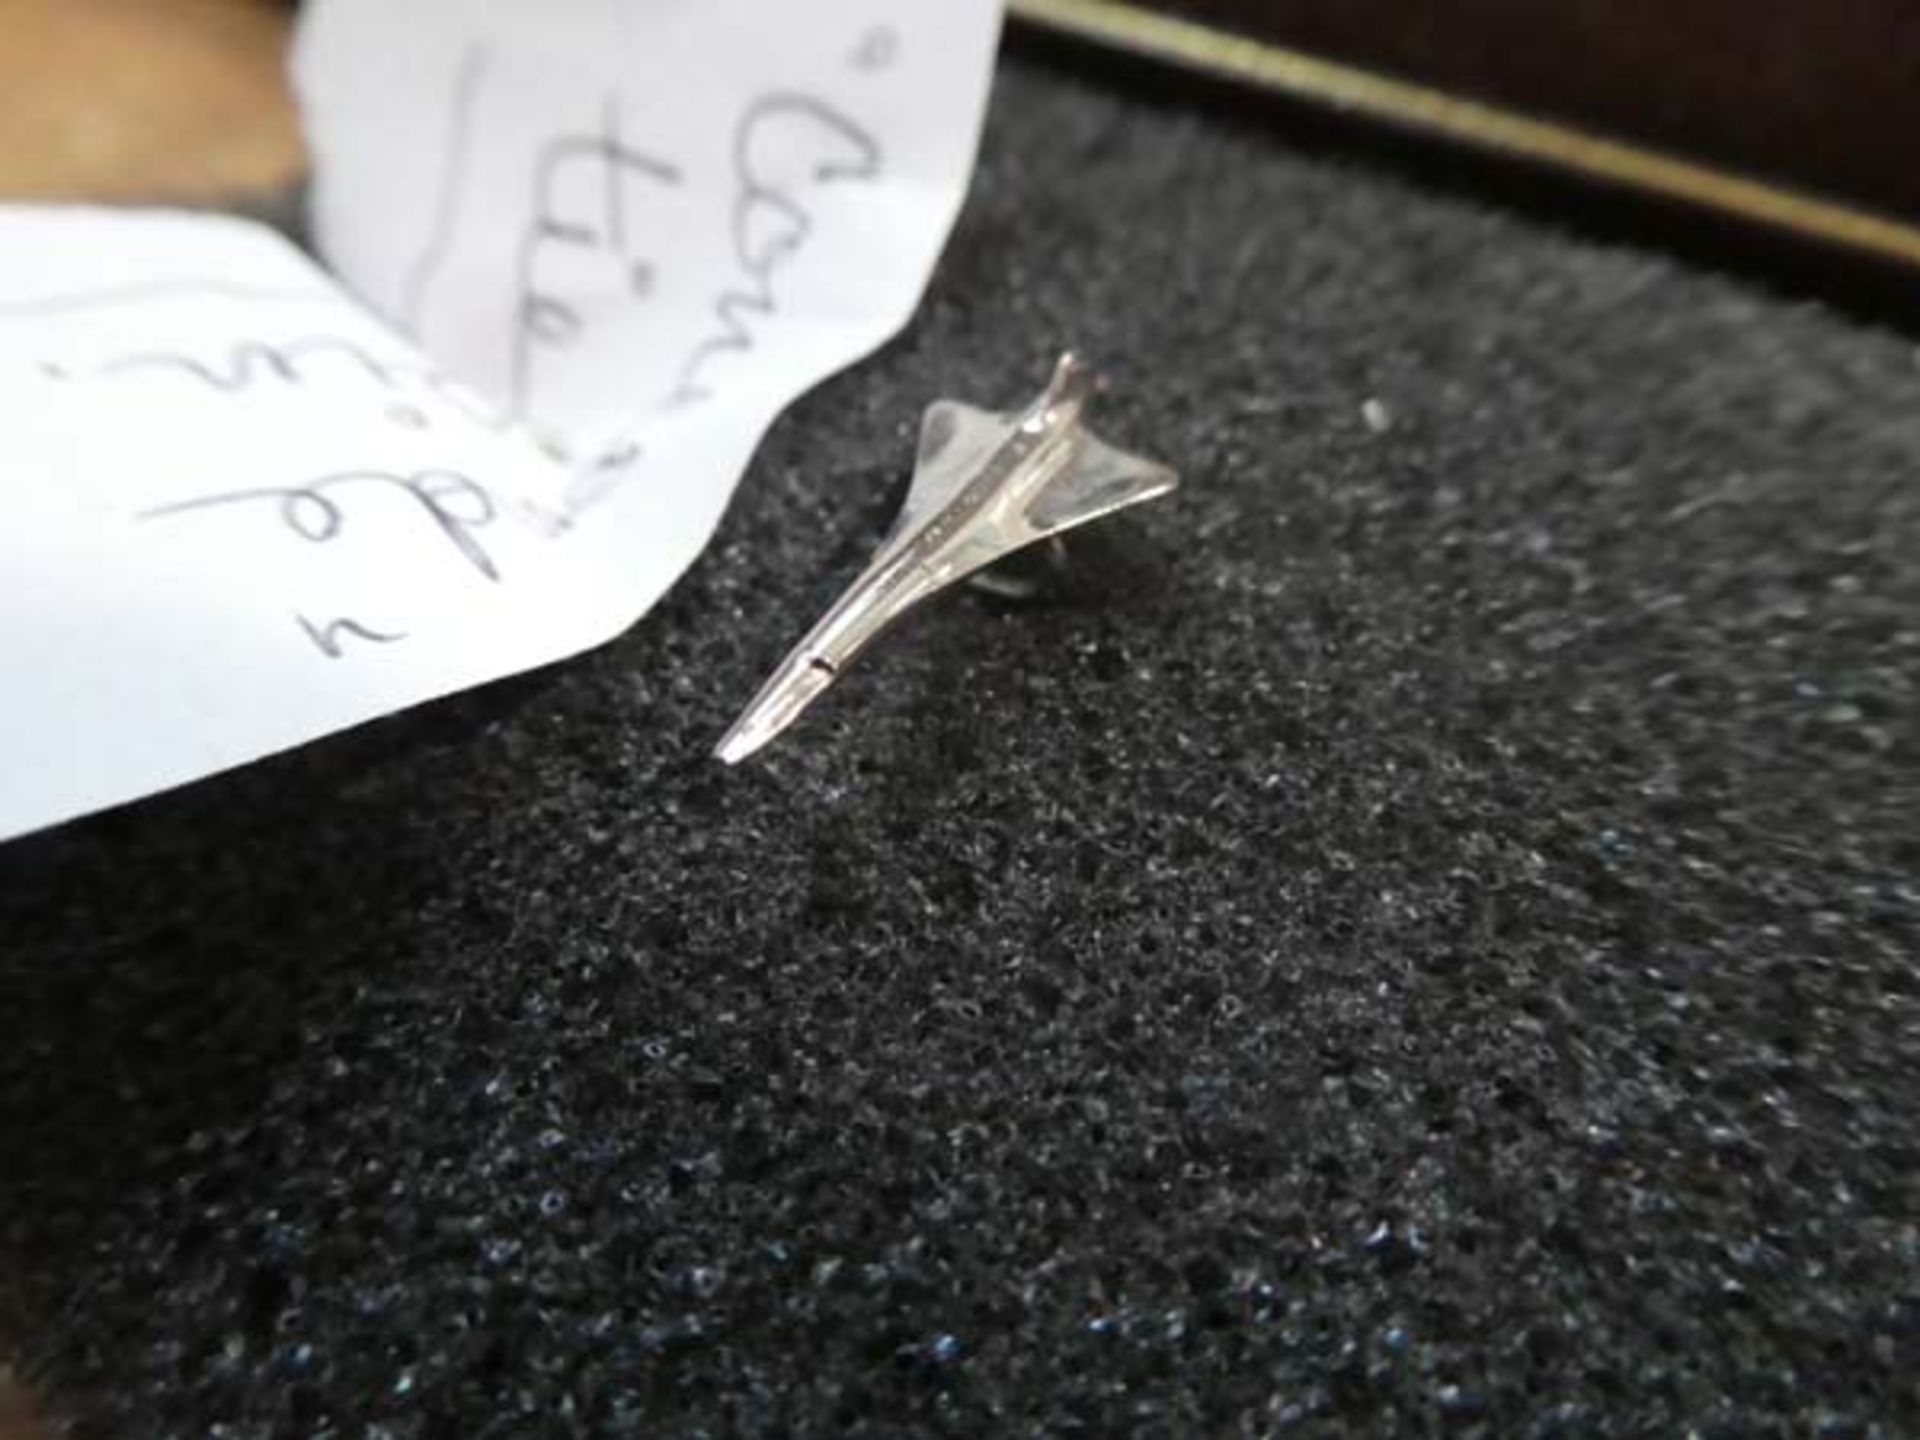 Concorde tie pin, silver hallmarked ingot on chain - Image 2 of 3